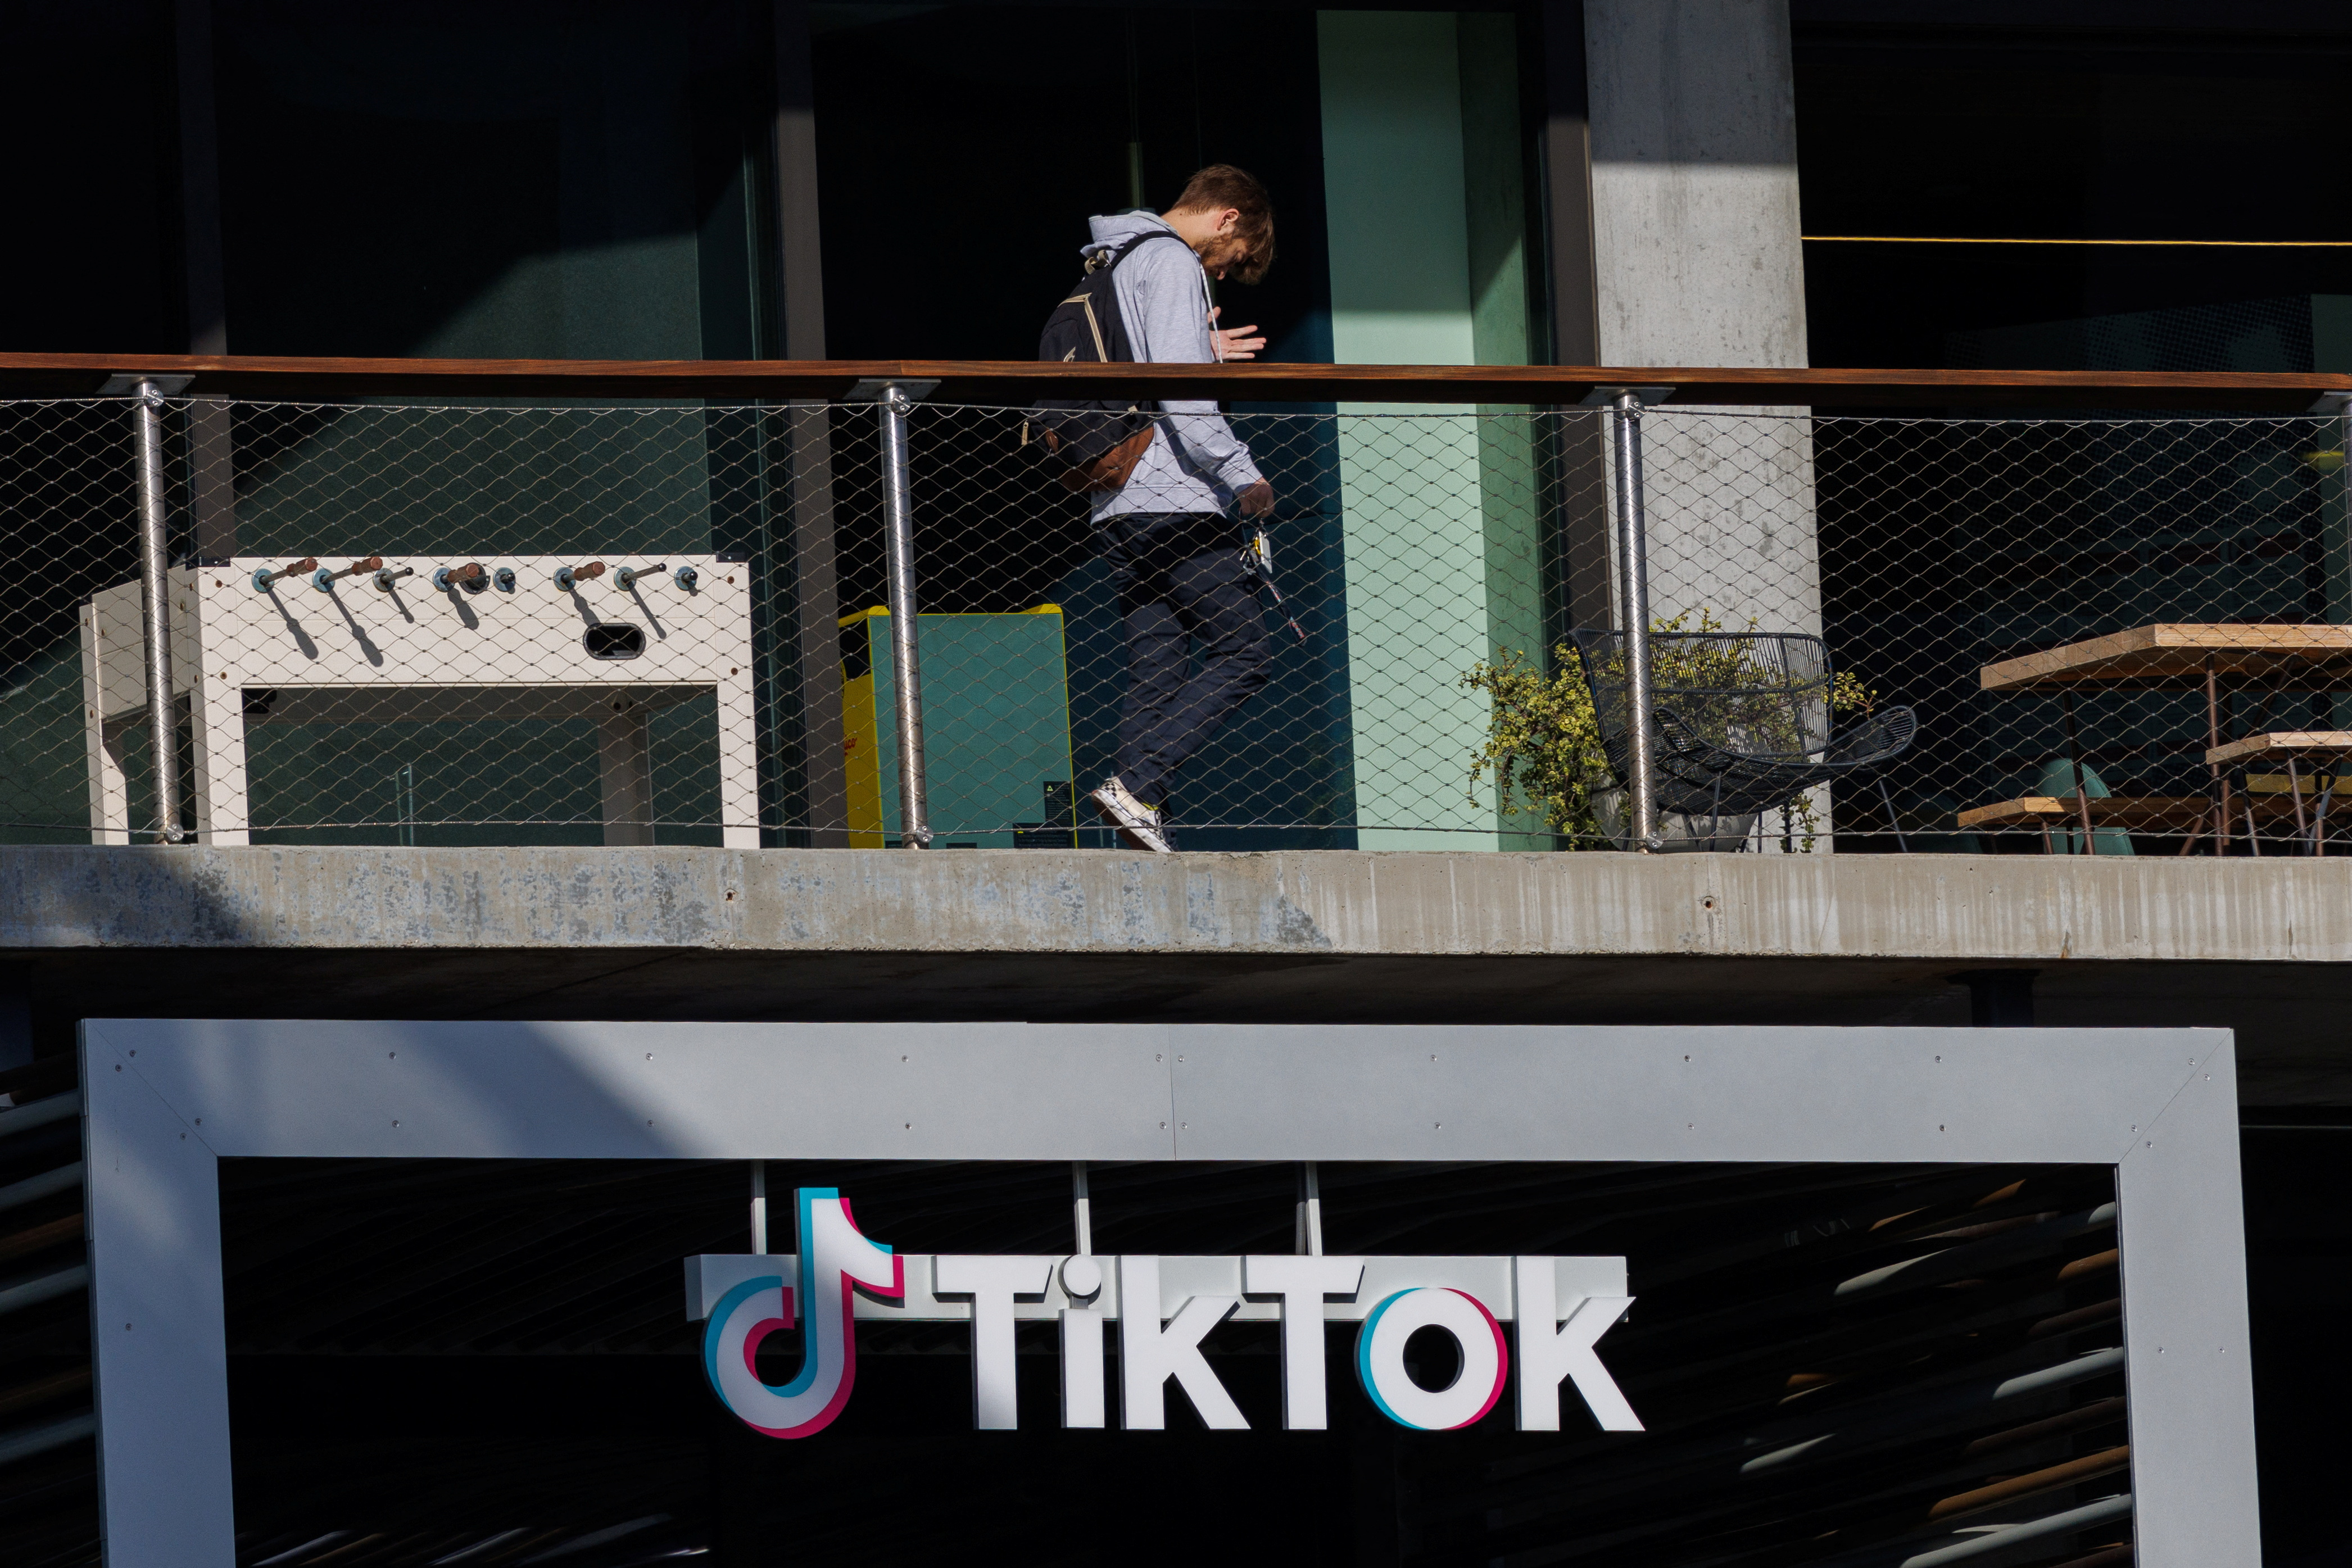 Tik Tok offices shown in California after U.S. Congress passes bill to divest in Chinese owner